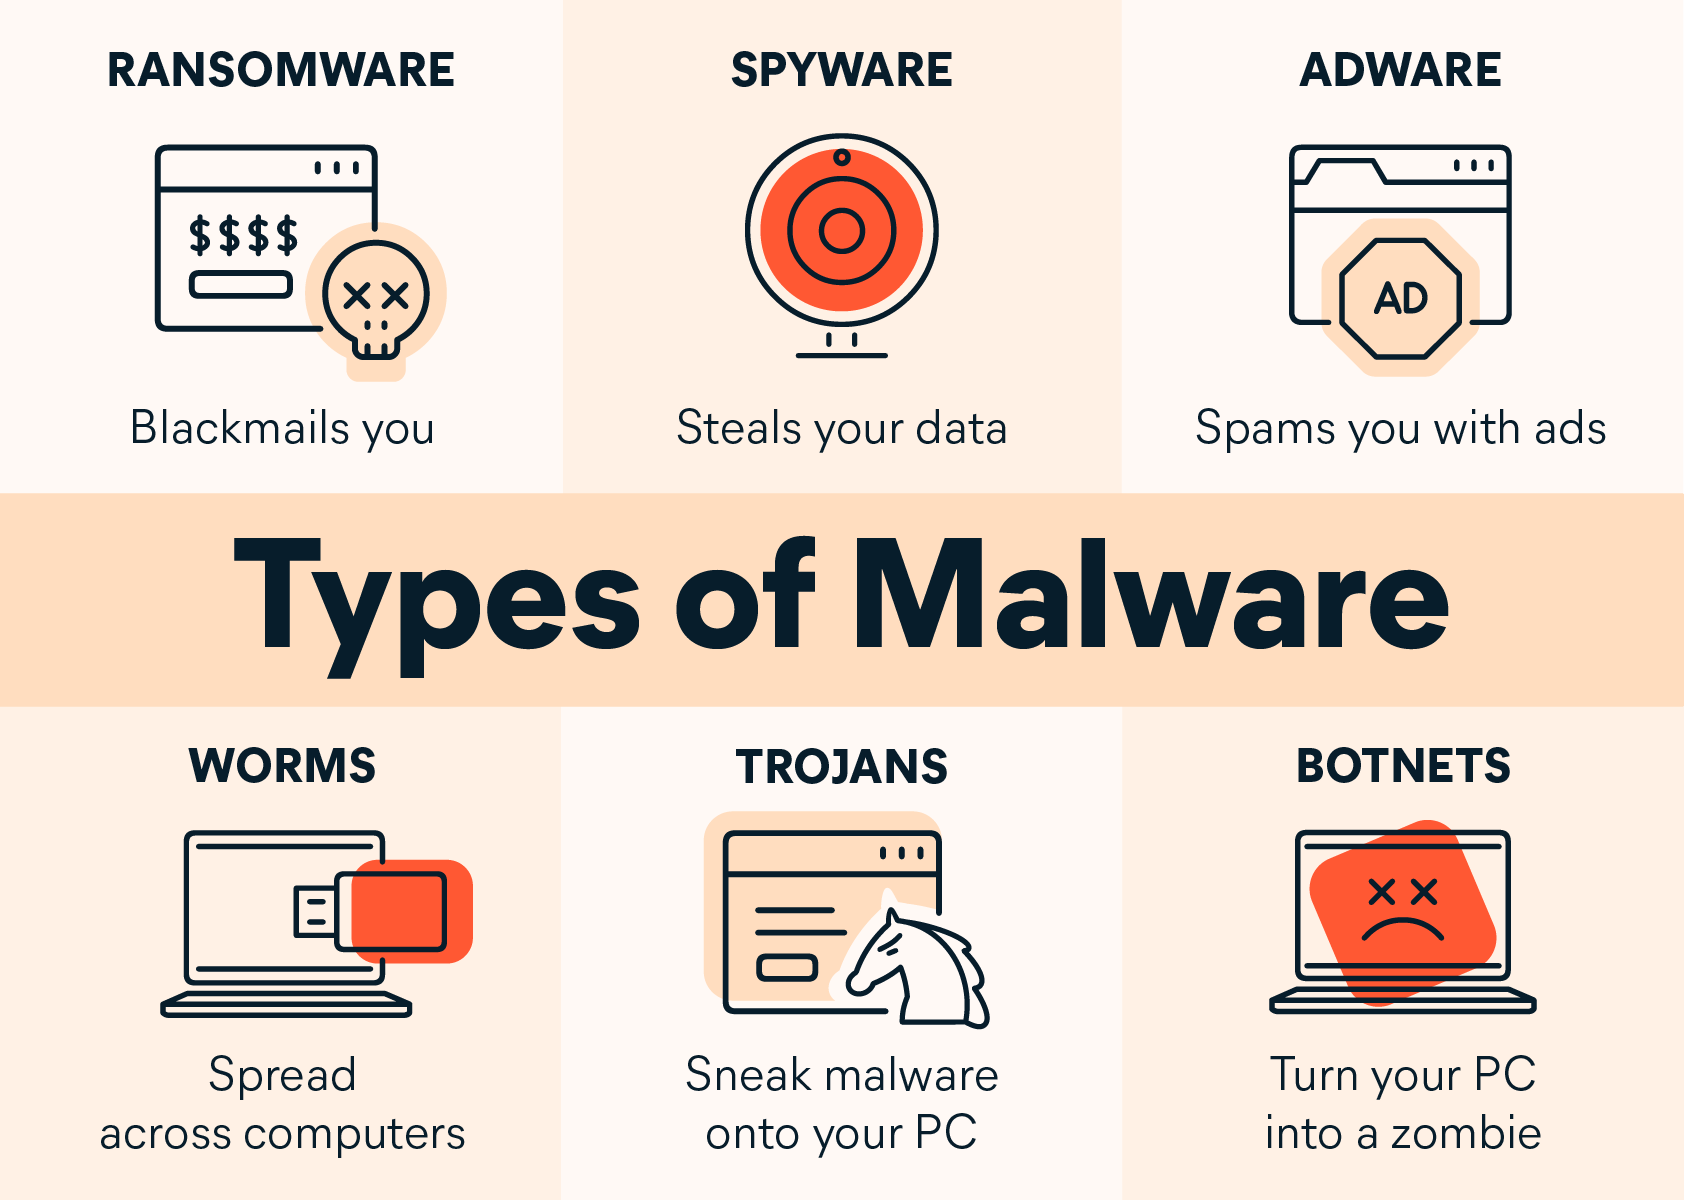 Common types of malware and how they impact devices and users.